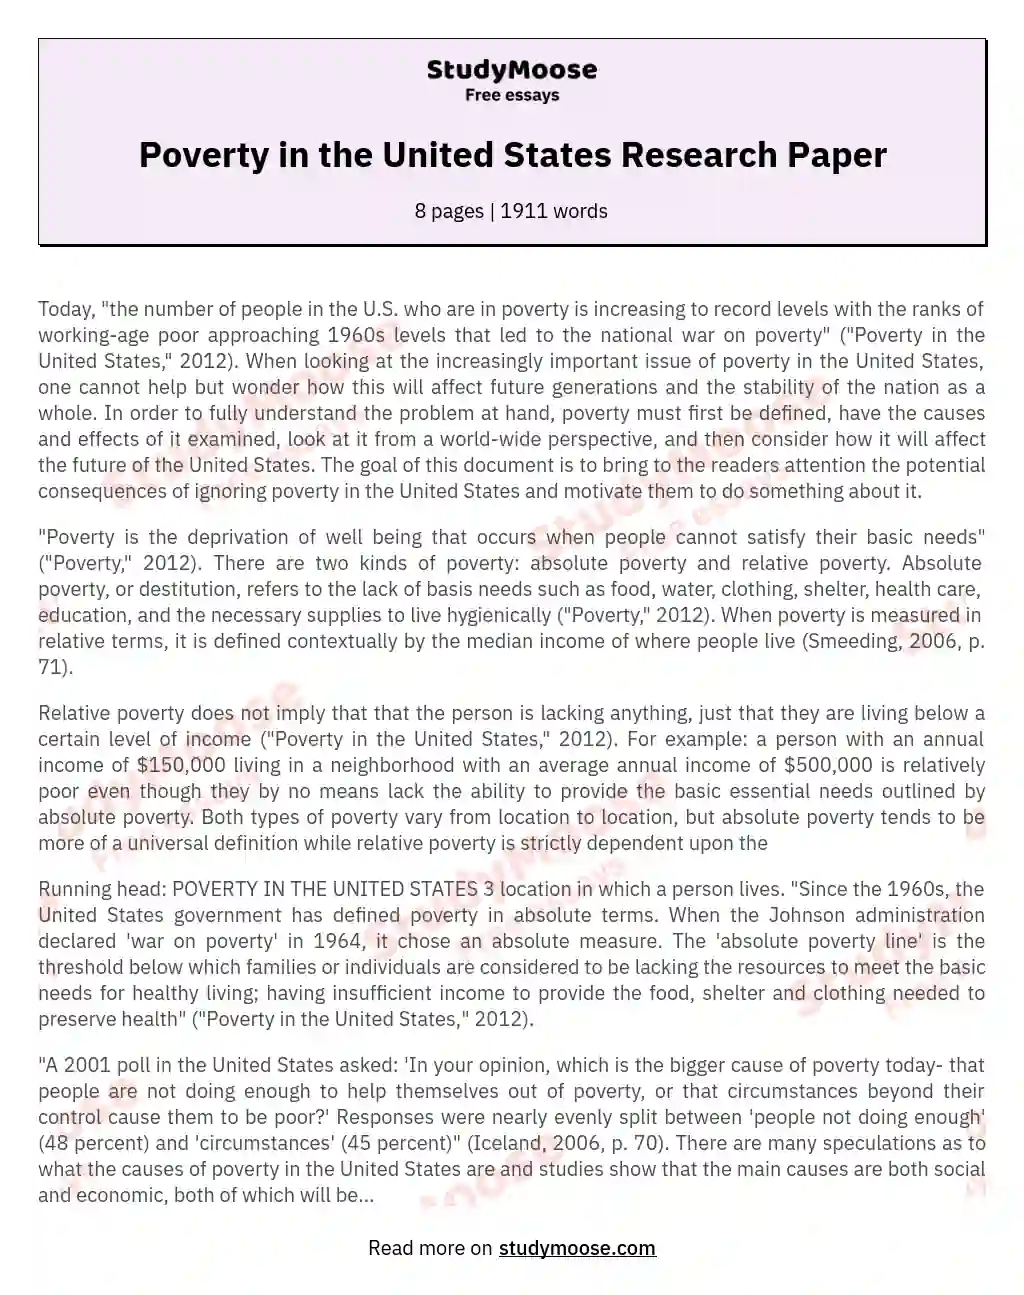 Poverty in the United States Research Paper essay